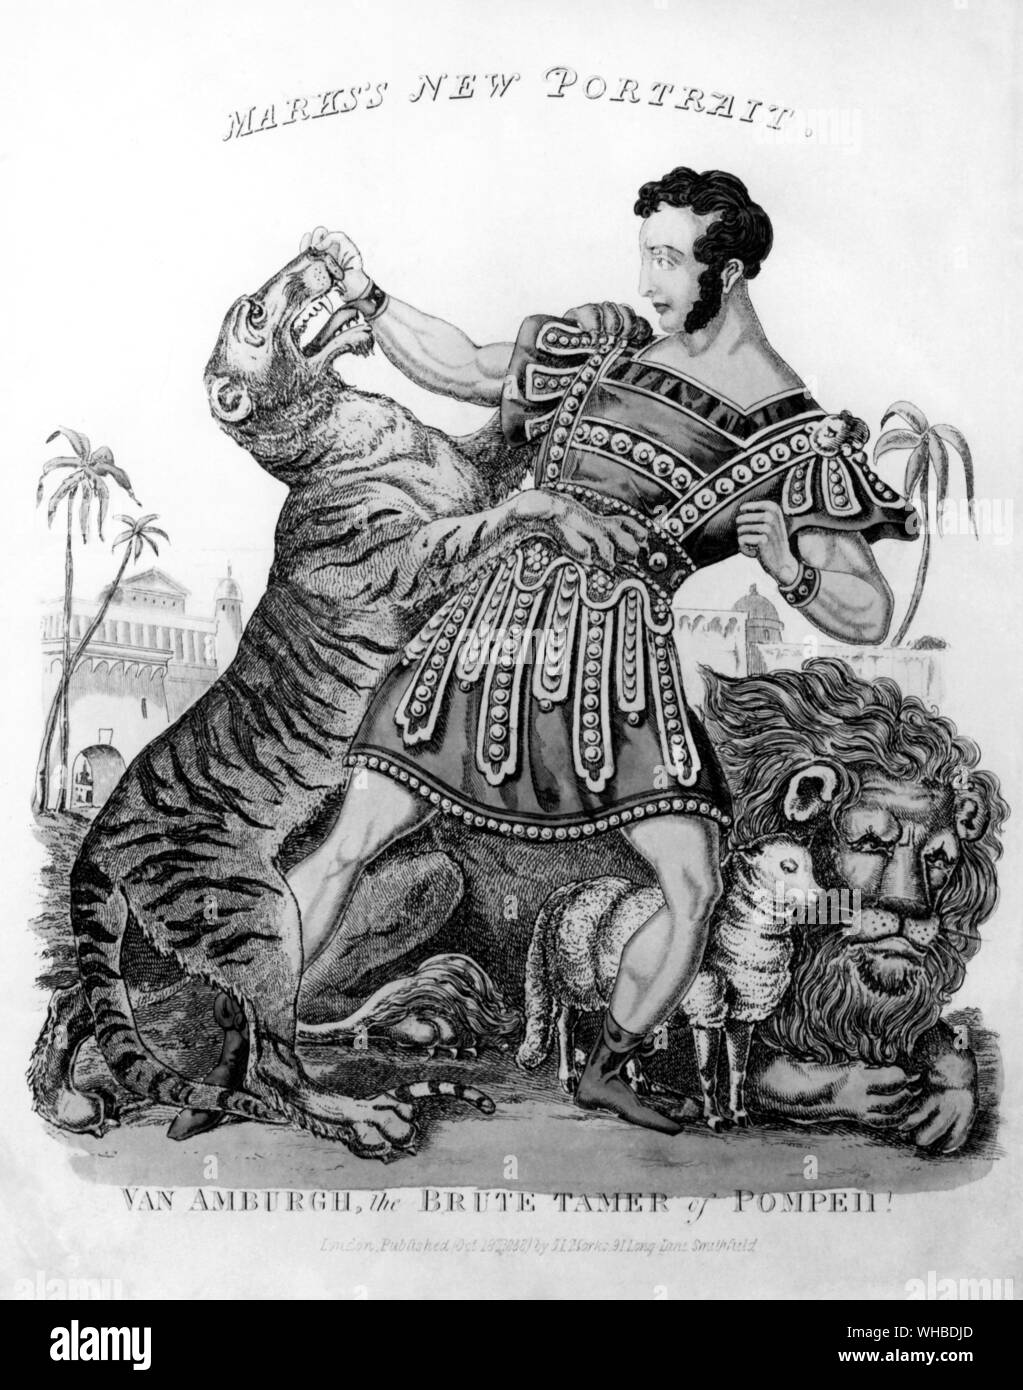 Morok the beast tamer - Van Amburgh, the brute tamer of Pompeii - the first tamer to perform with a mixed group of animals was American Van Amburgh who was billed at Astley's Amphitheatre in London as The Brute Tamer in 1838. His act, which included lions, tigers and leopards, was the first circus wild-beast act.. Stock Photo